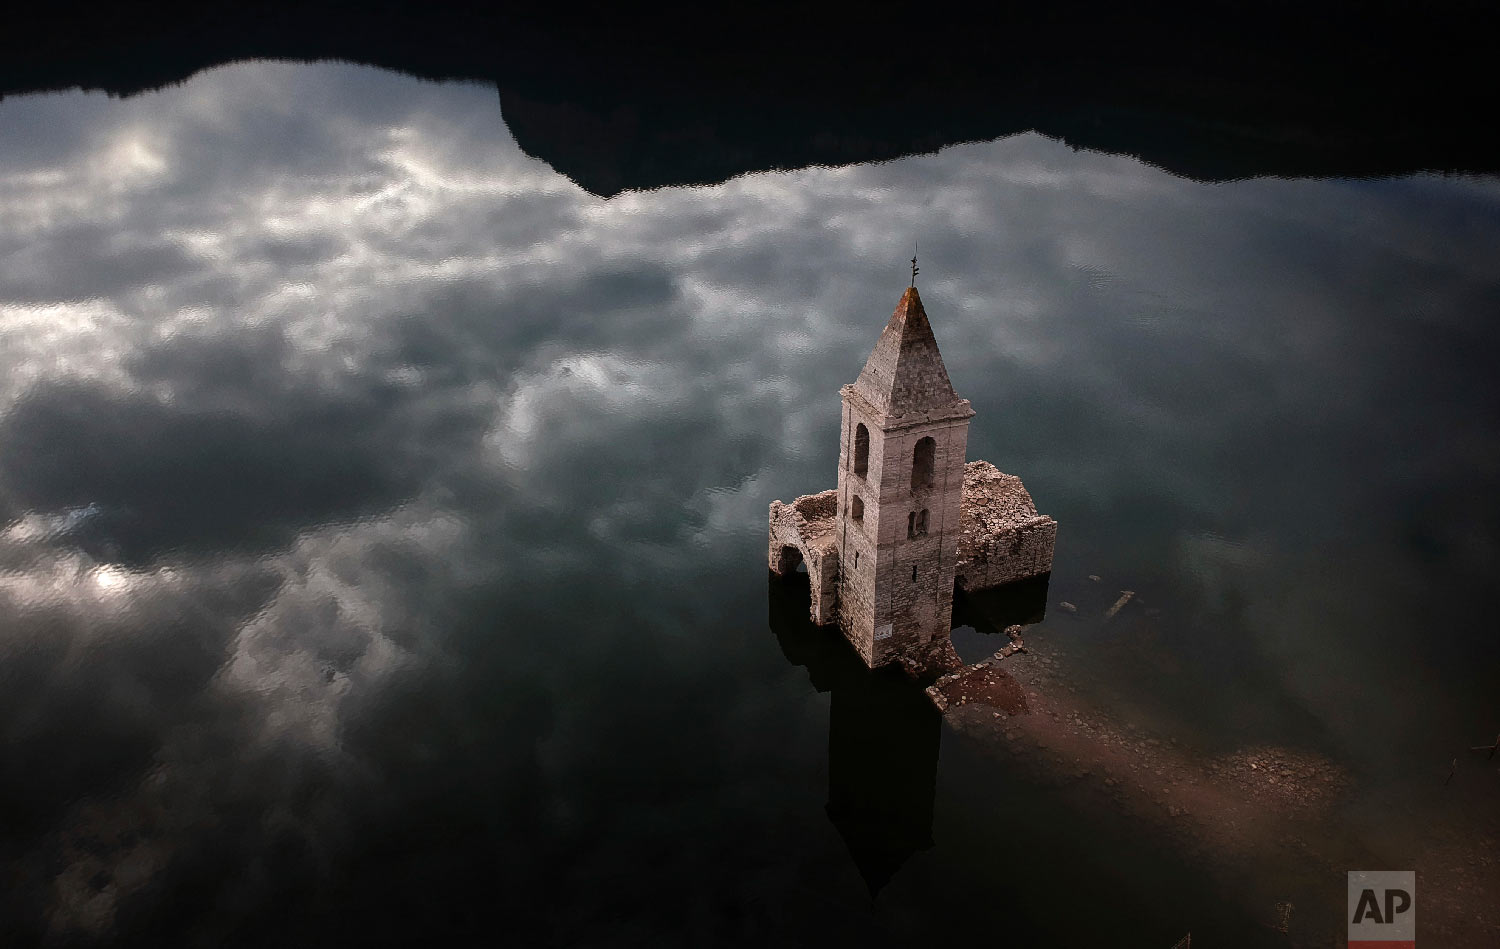  A church and remains of an ancient village which are usually covered by water are seen inside the reservoir of Sau, in Vilanova de Sau, Catalonia, Spain on Jan 11, 2018. (AP Photo/Emilio Morenatti) 